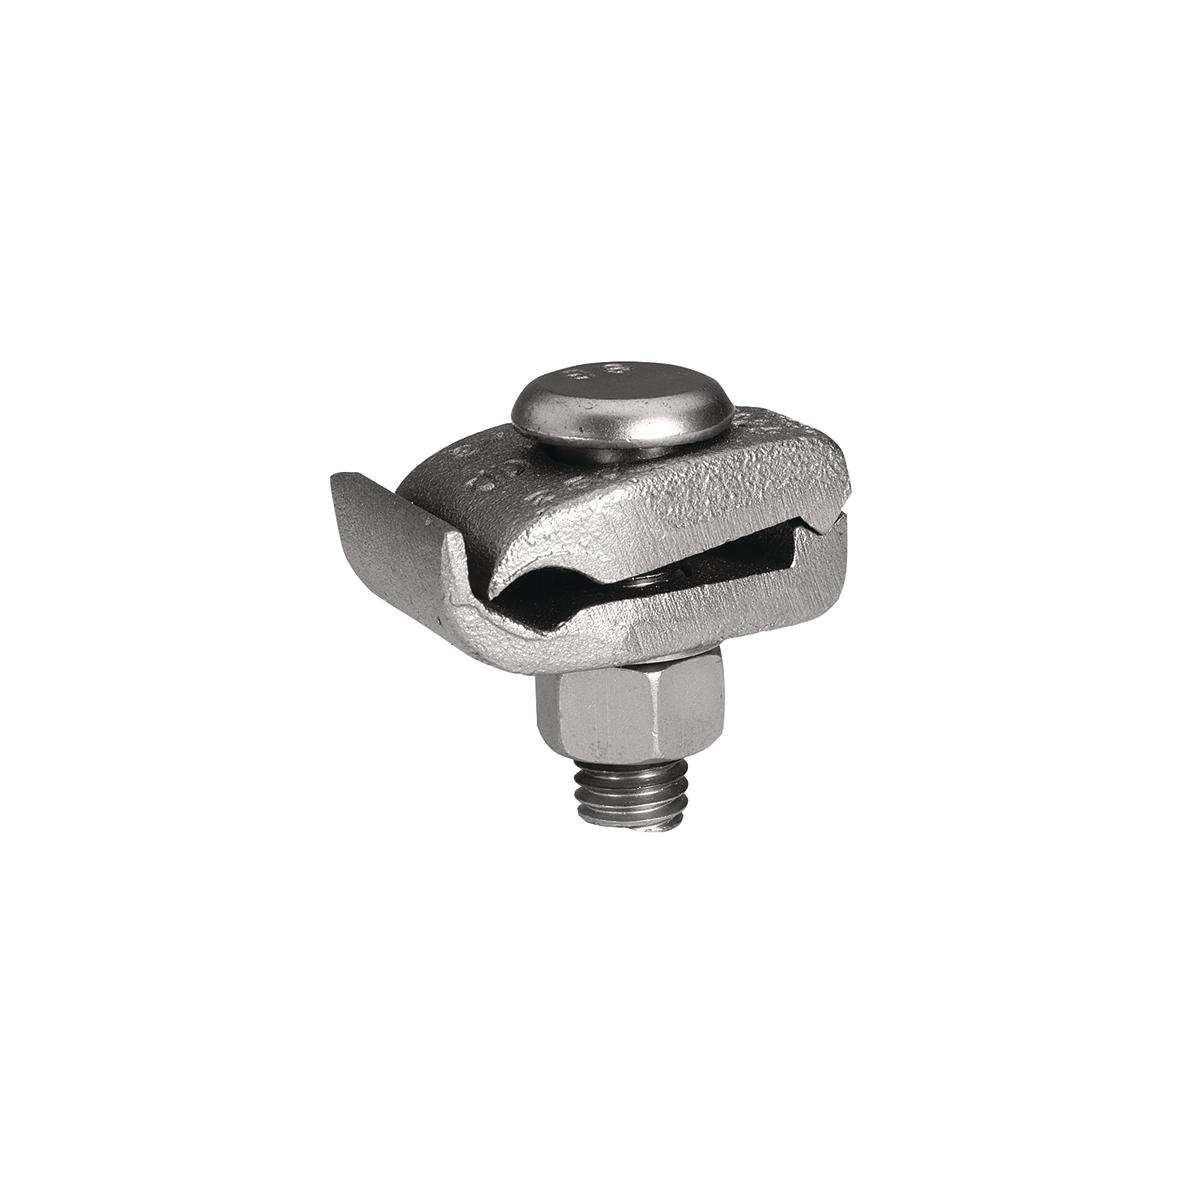 Hubbell GB34T3TN Mechanical Grounding Connector, Cable to 0.63" - 0.814" Thick Bar, 300 kcmil - 500 kcmil, 1/2" Stud, Tin - Plated. 